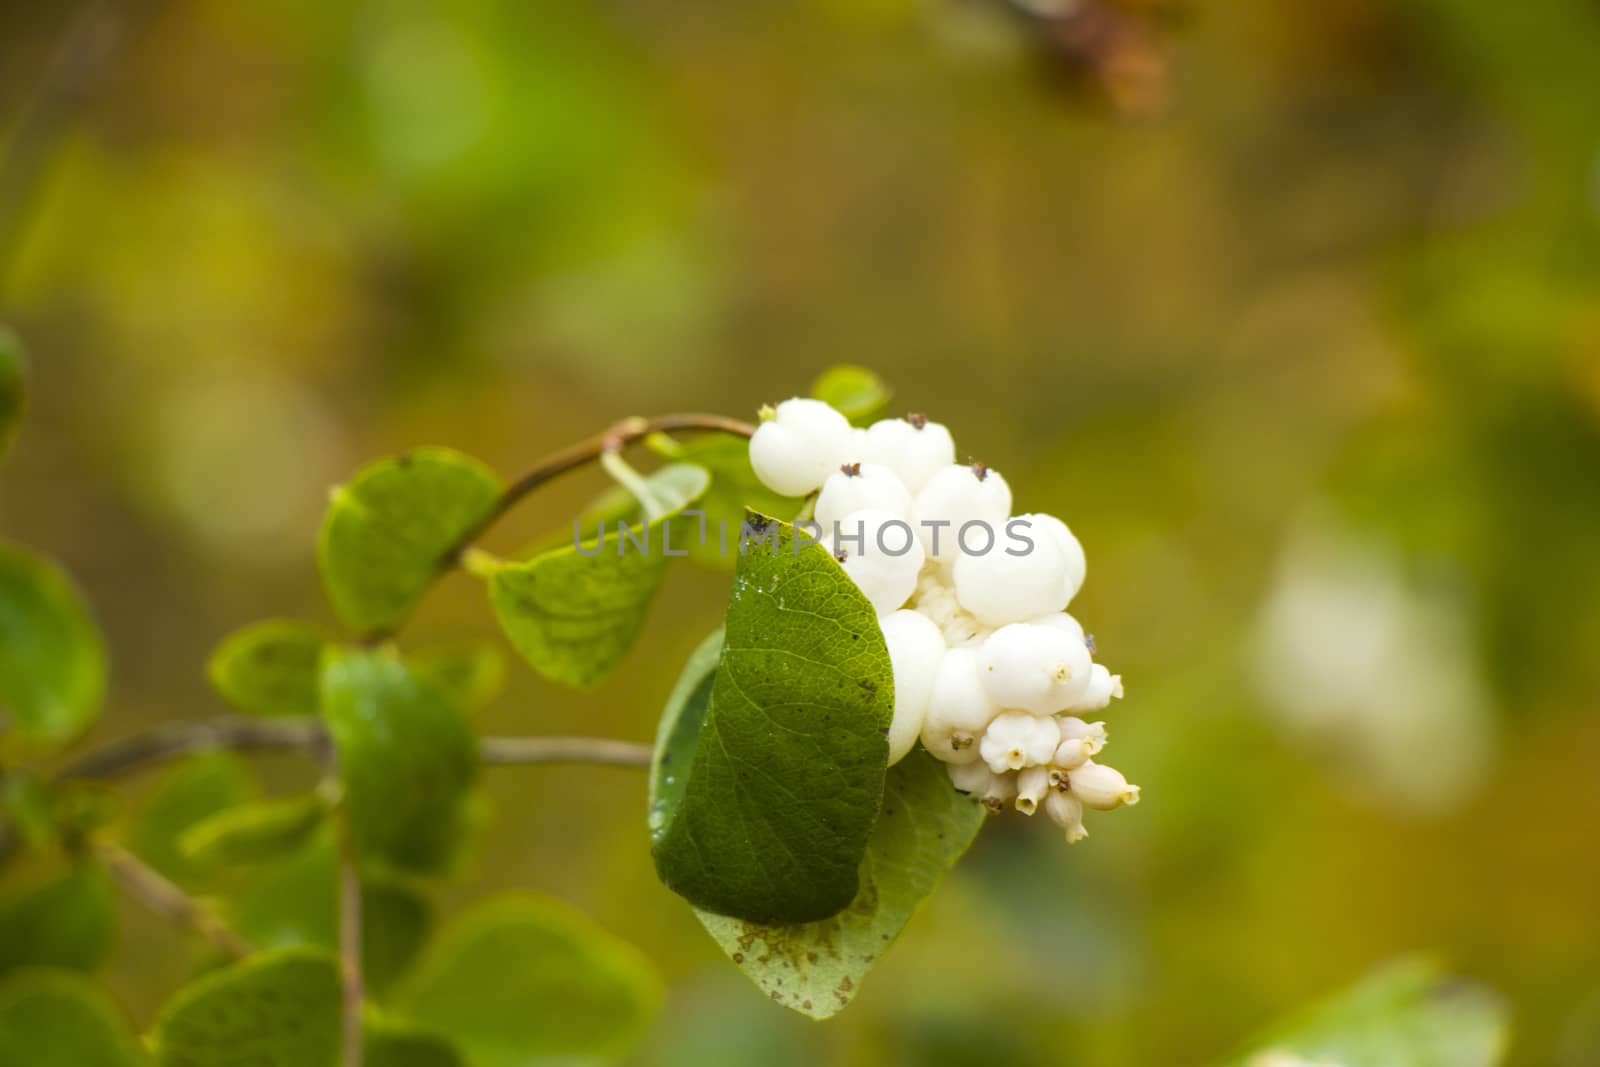 Snowberry plant close-up and macro on the green background, autumn time, nature background